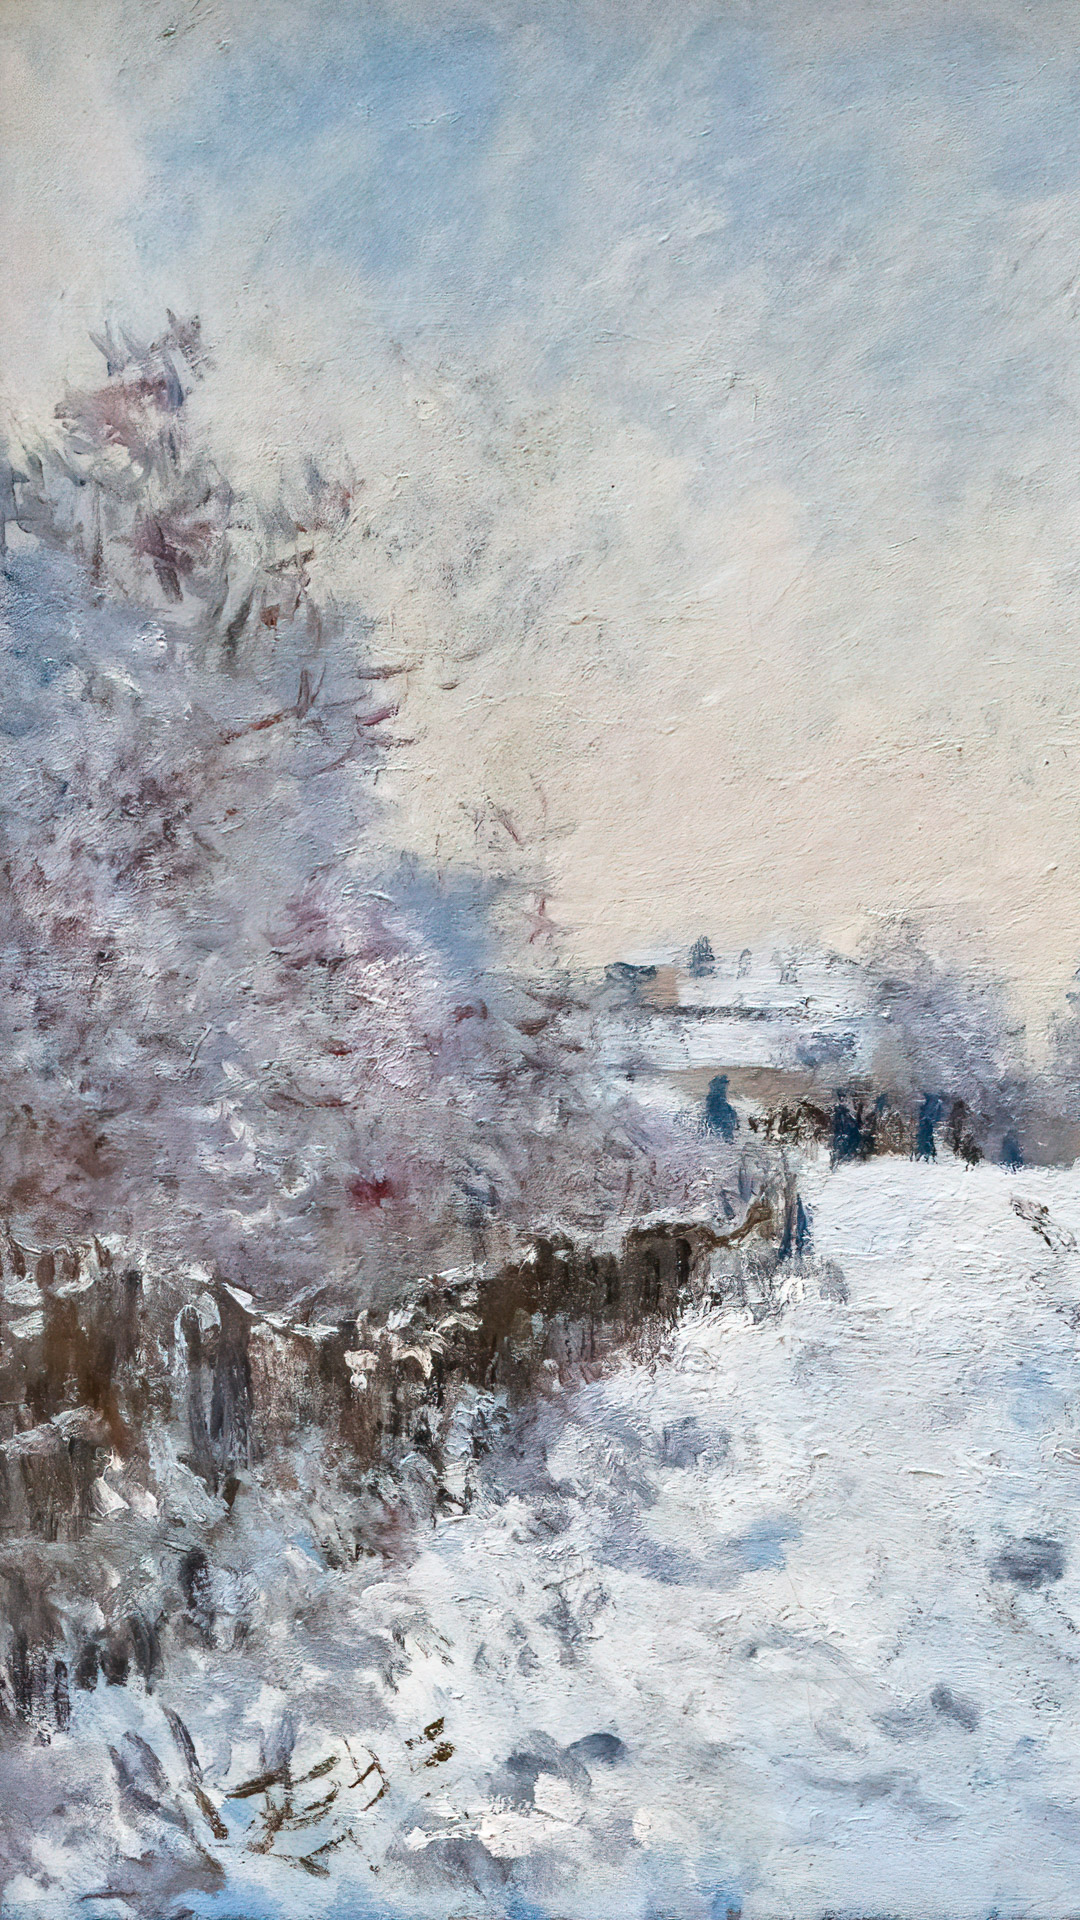 Let Claude Monet's 'Snow at Argenteuil' grace your iPhone, turning your screen into a winter wonderland of artistic charm.